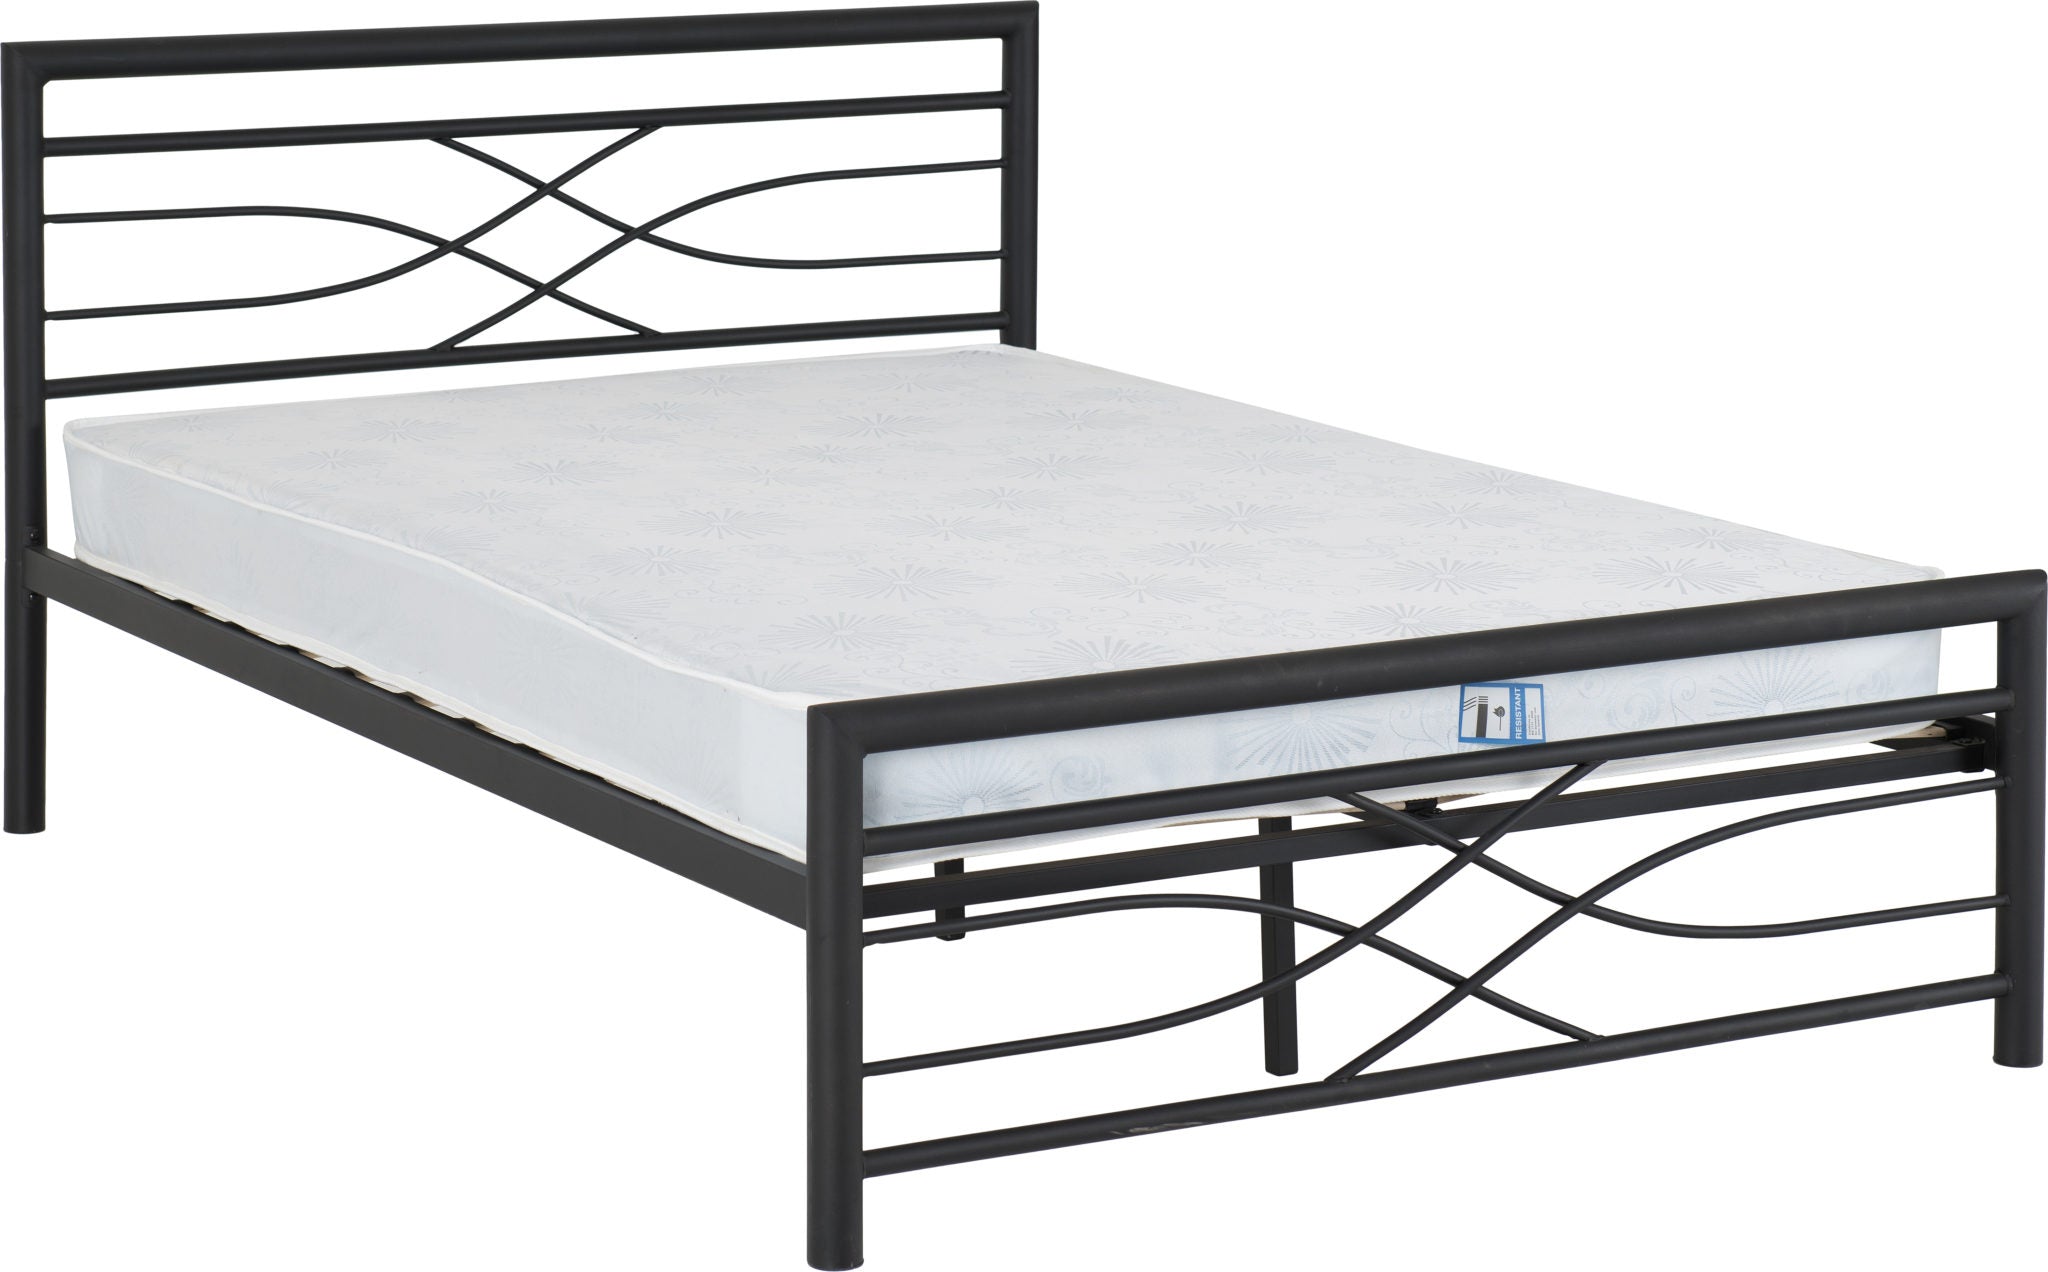 Kelly 4'6" Bed